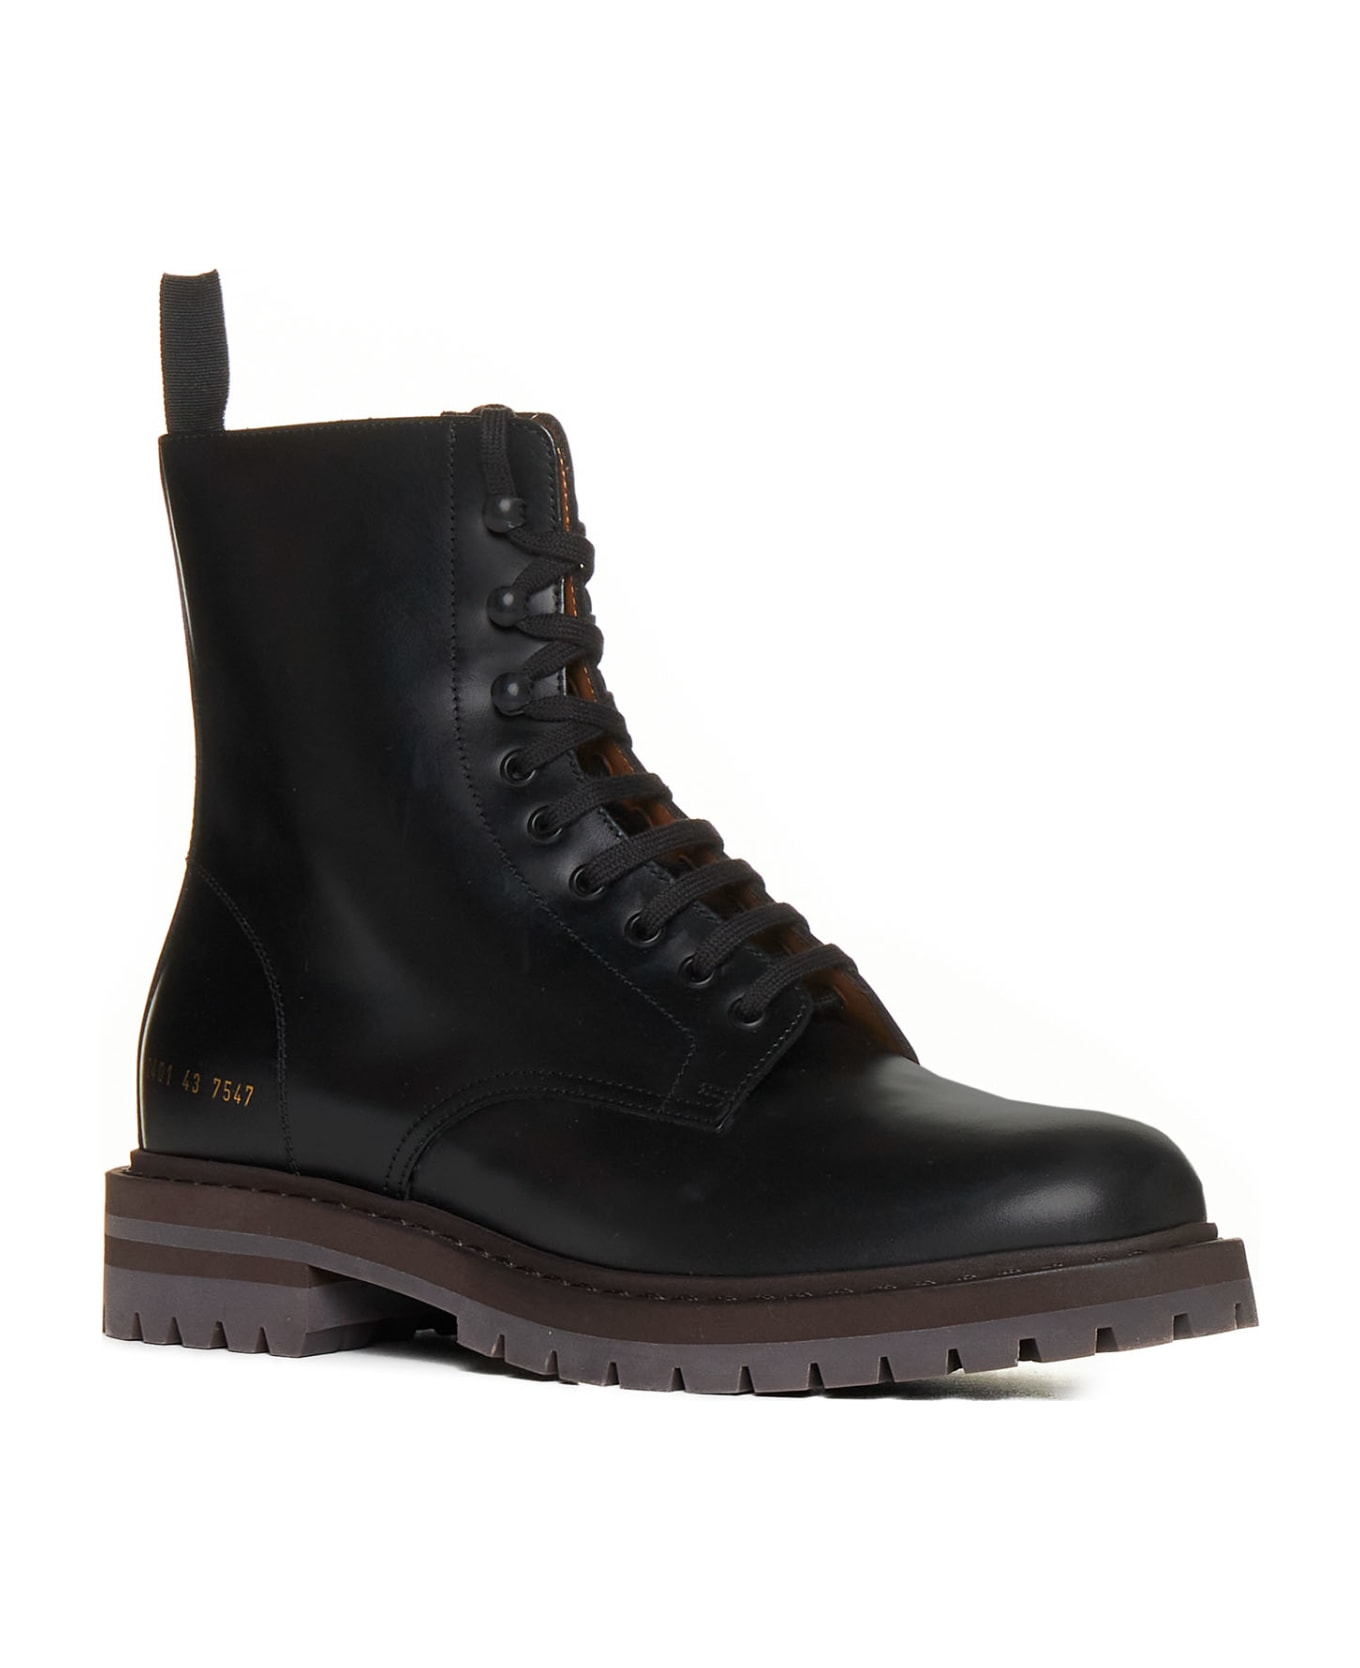 Common Projects Combat Boots In Black Leather - Black